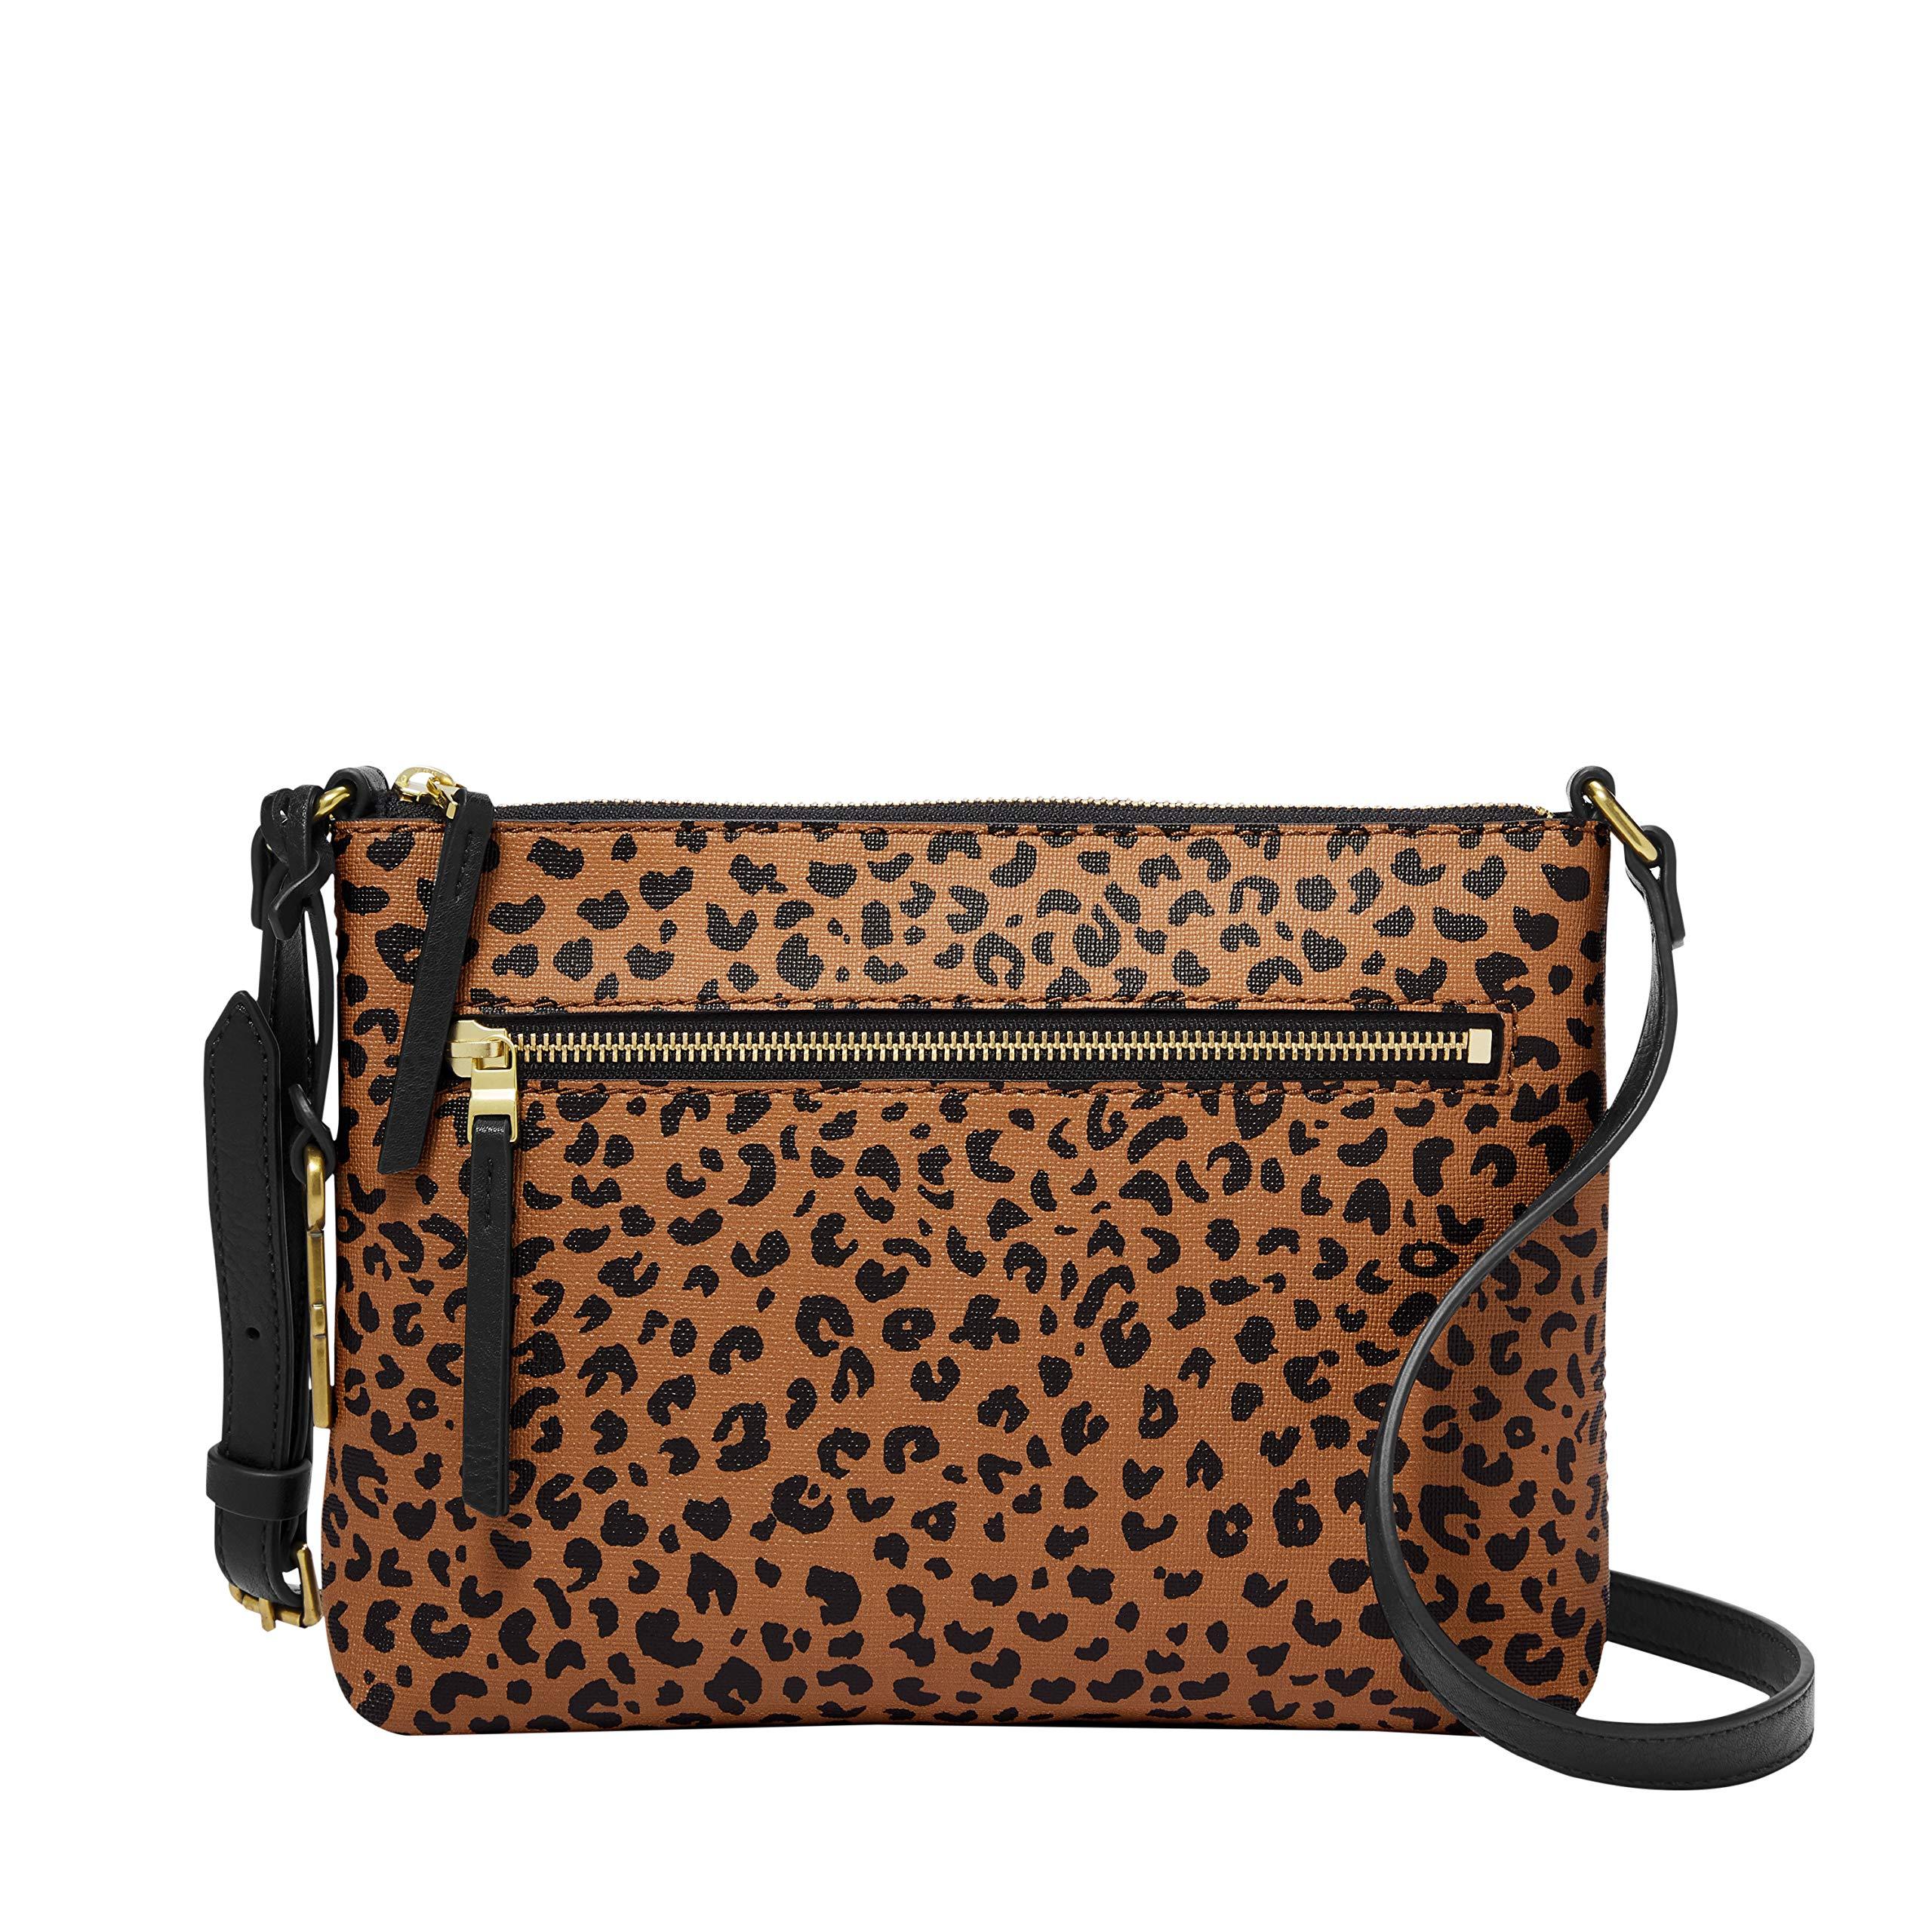 Fossil Fiona Small Crossbody Bag in Cheetah (Brown) - Lyst